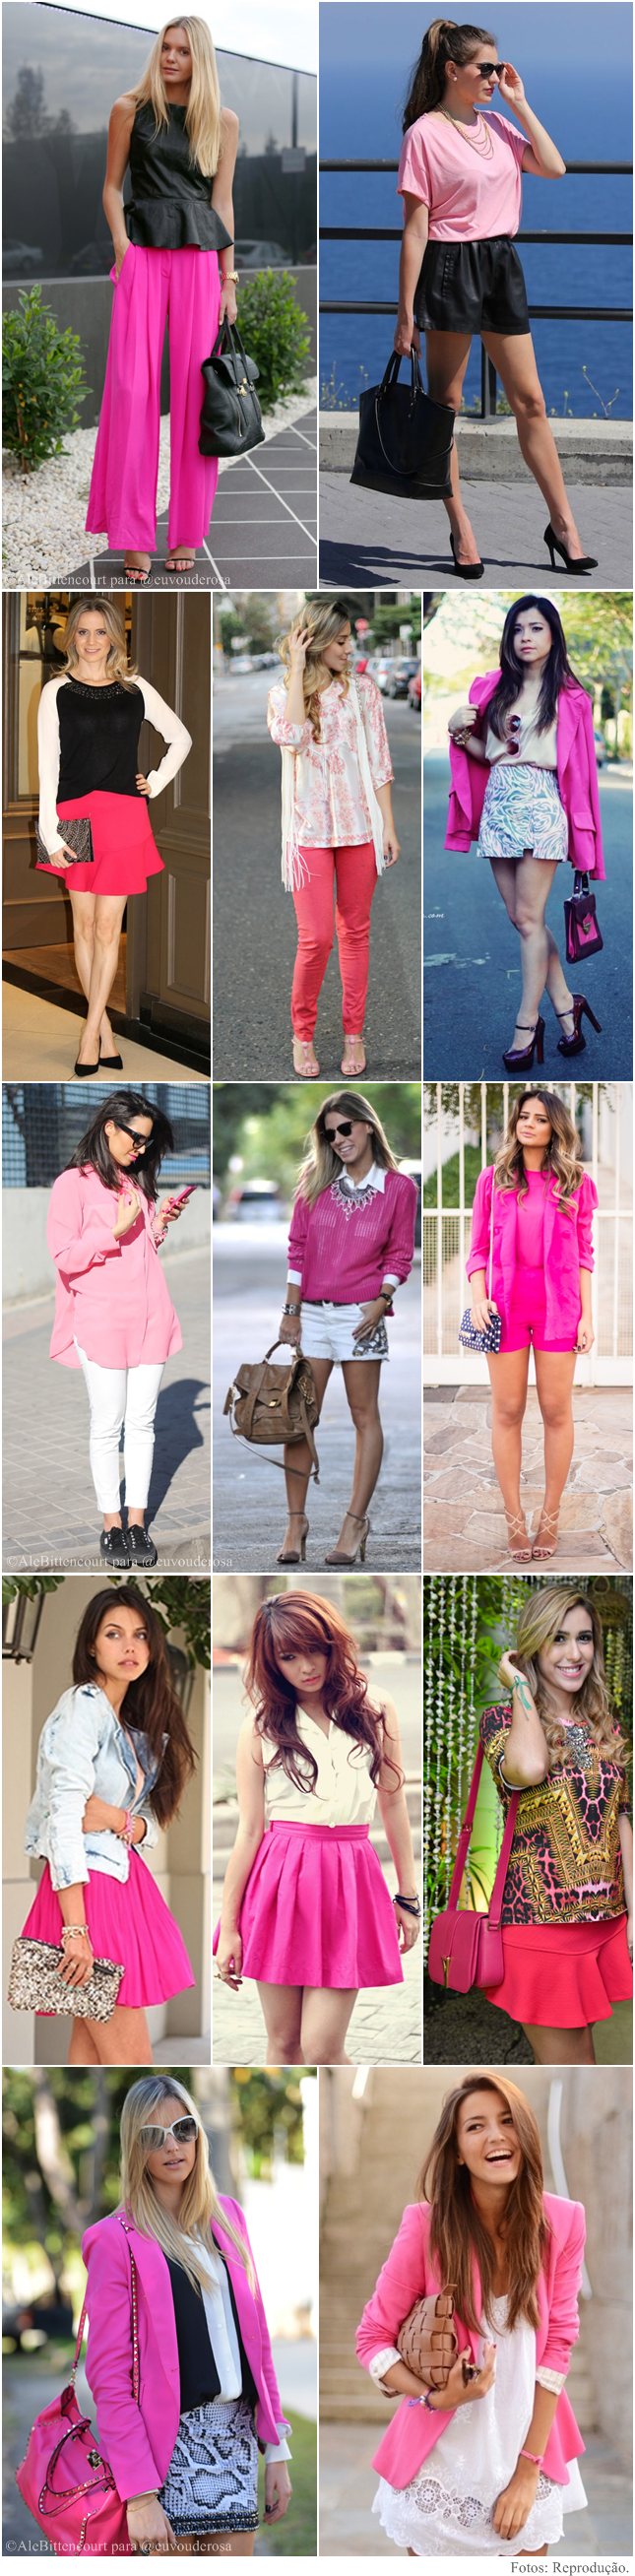 Trend to Watch: Hot Pink!